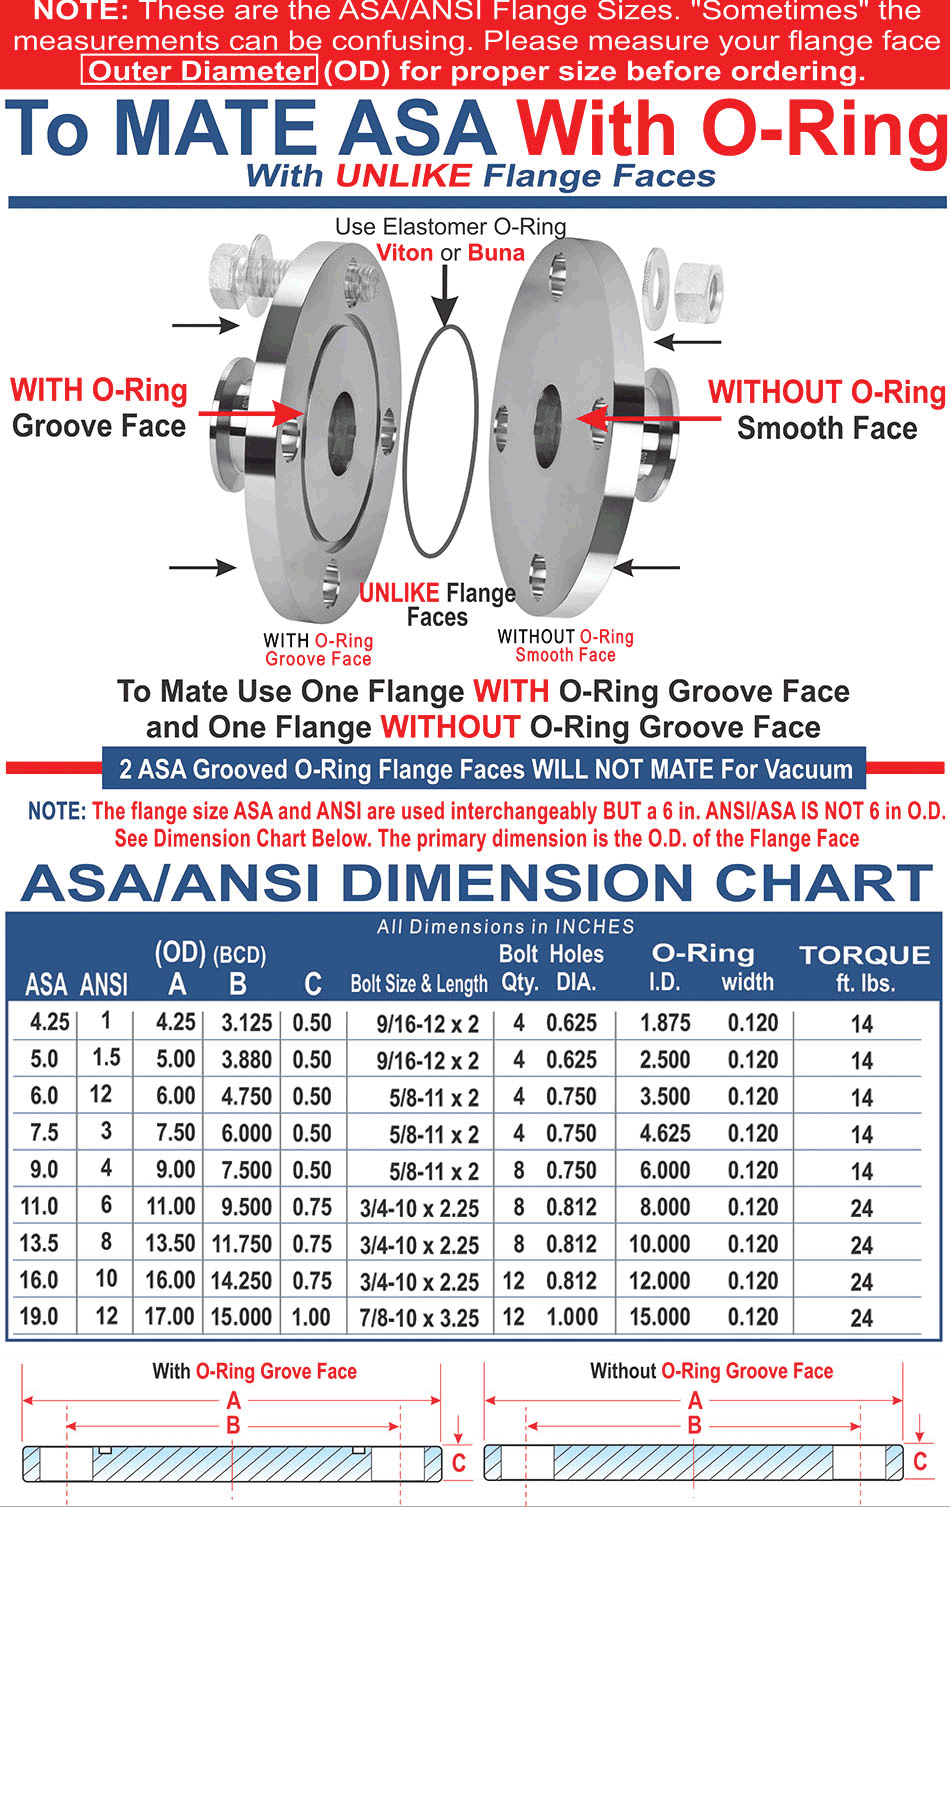 Ideal Vacuum Asa 6 Inch Blank Flange With O Ring Groove 11 In Od 9 5 d 0 750 Hole Dia 8 Holes